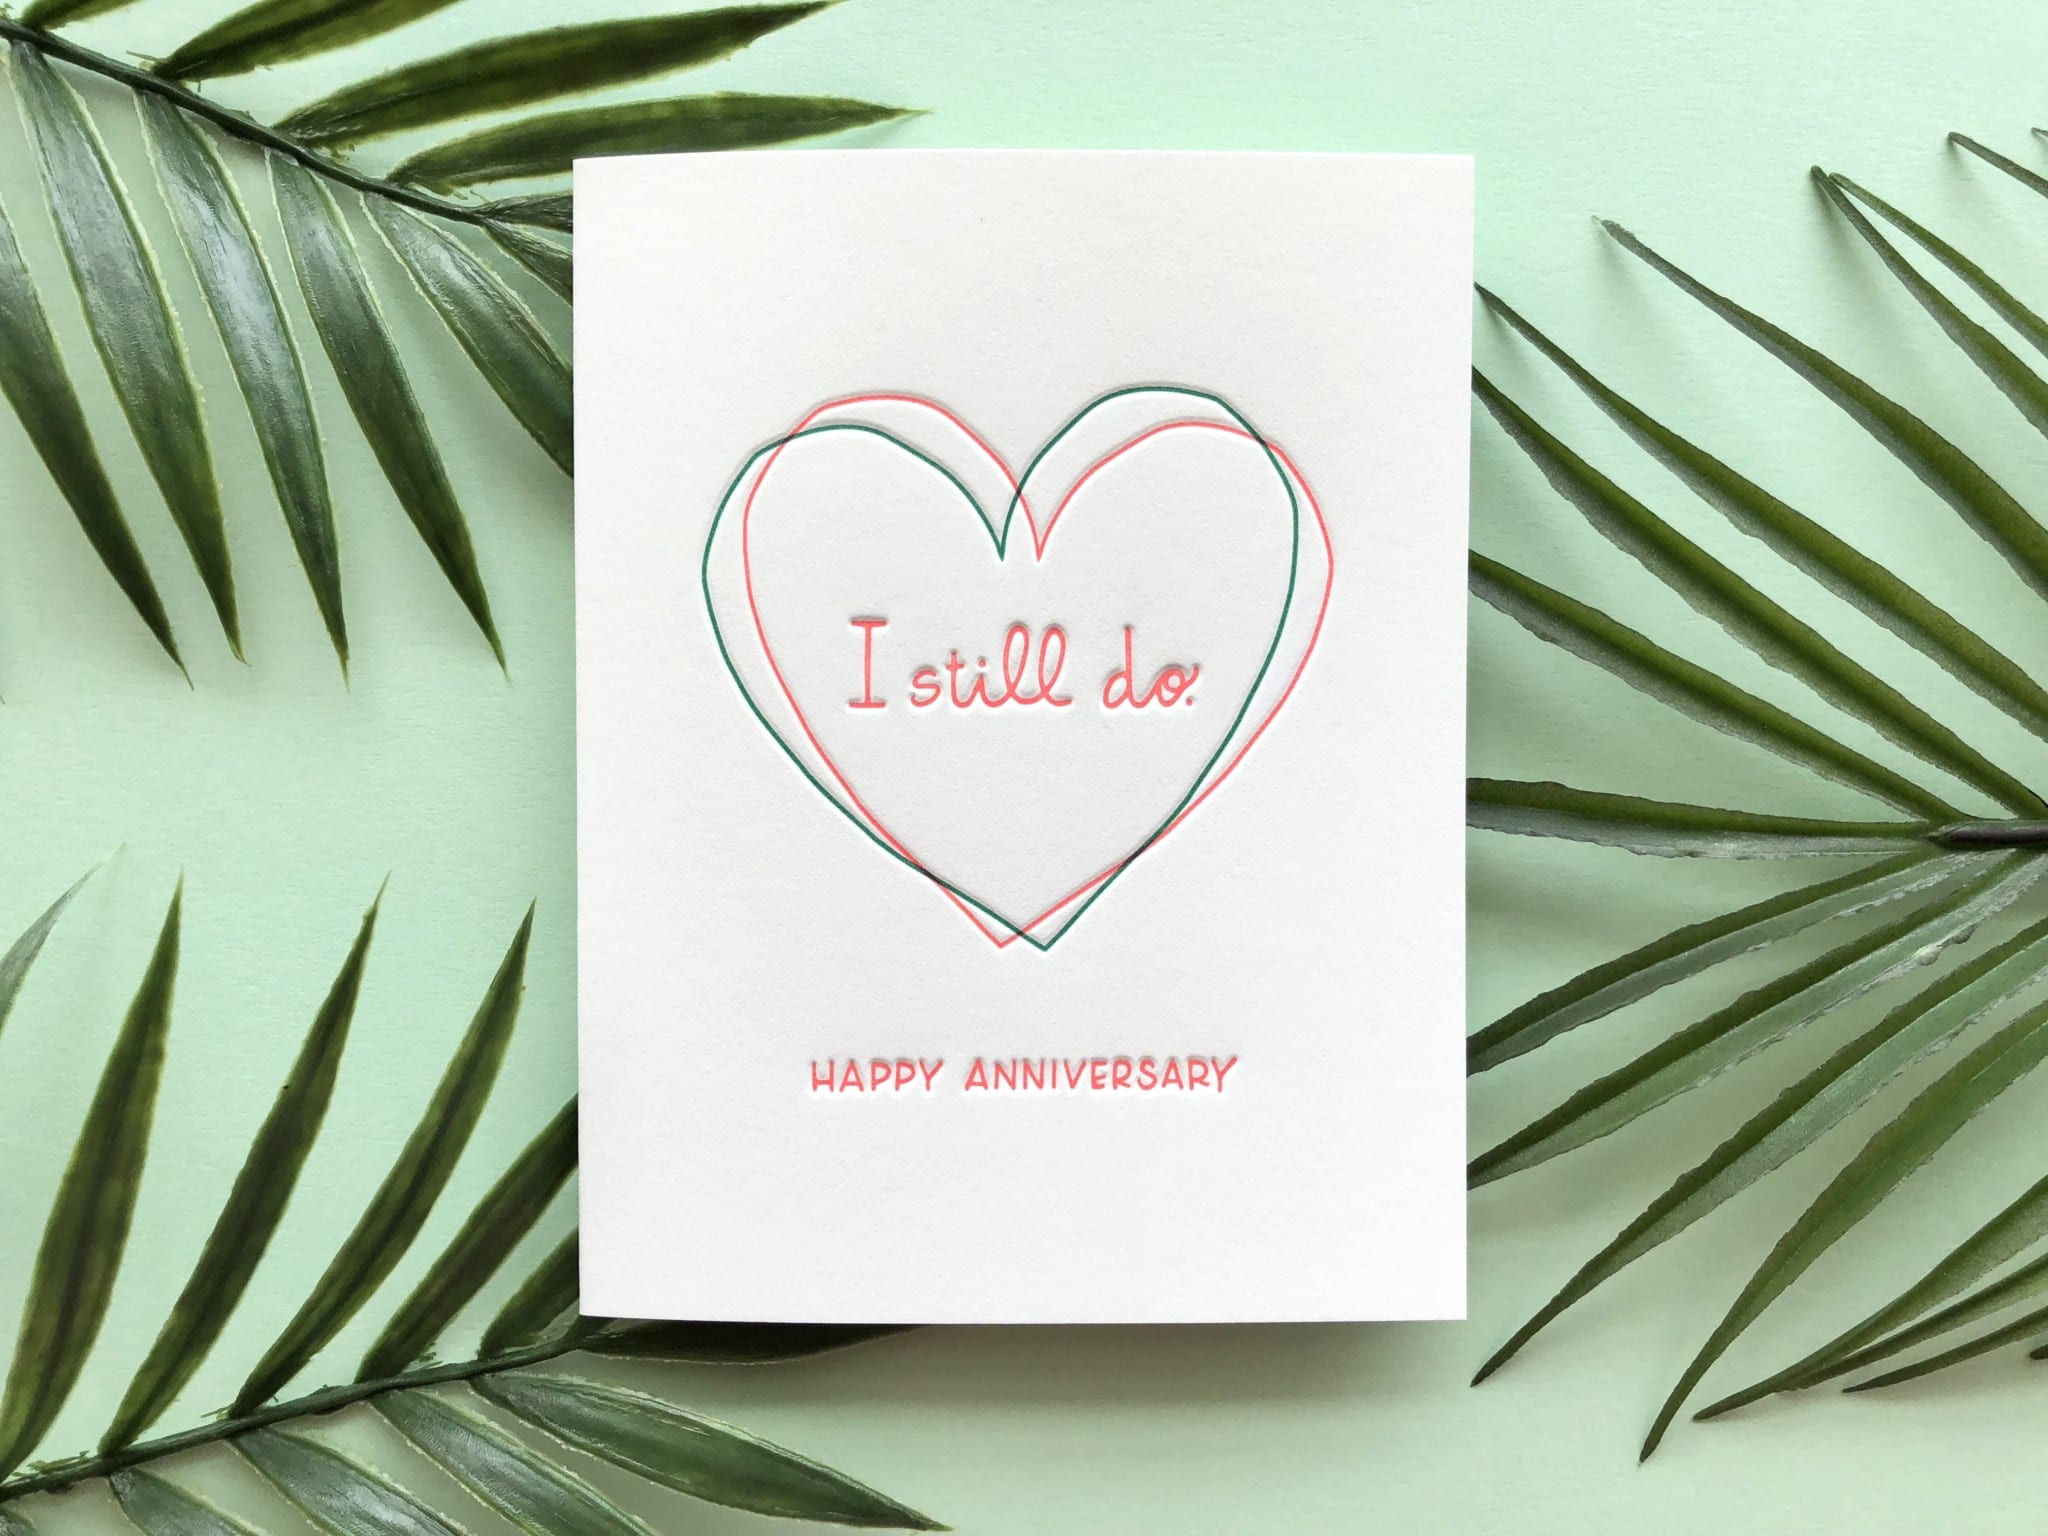 Greeting card with a hand-drawn heart and the message "I still do - Happy Anniversary" on a green background with palm leaves.